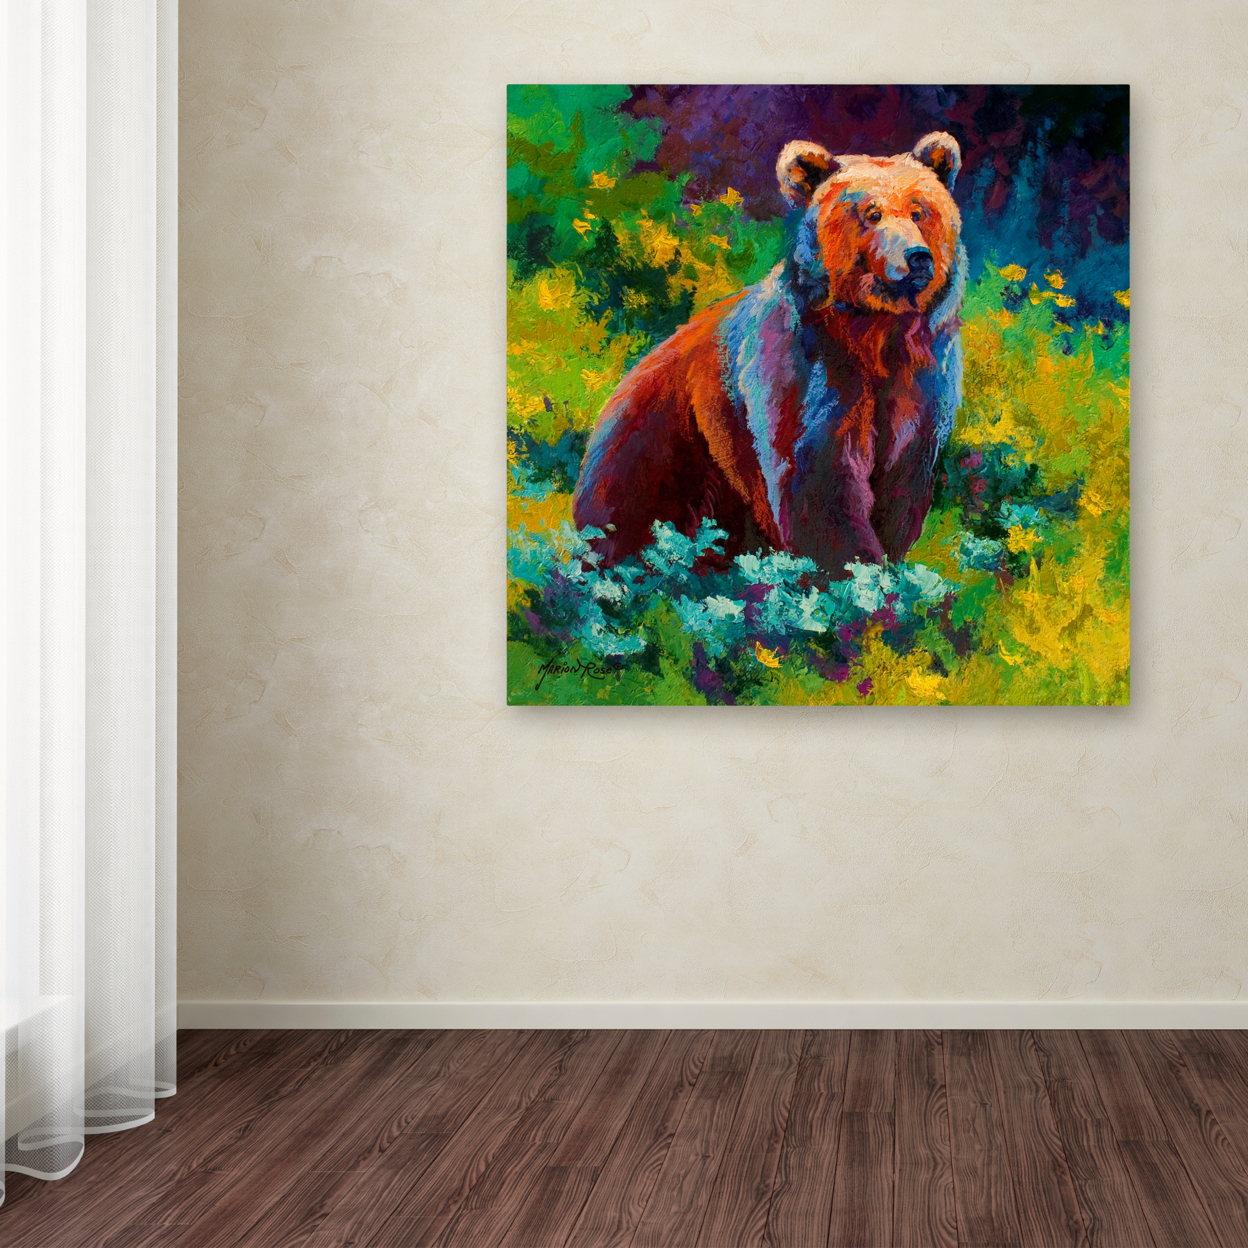 Marion Rose 'Wildflower Grizz' Ready To Hang Canvas Art 14 X 14 Inches Made In USA